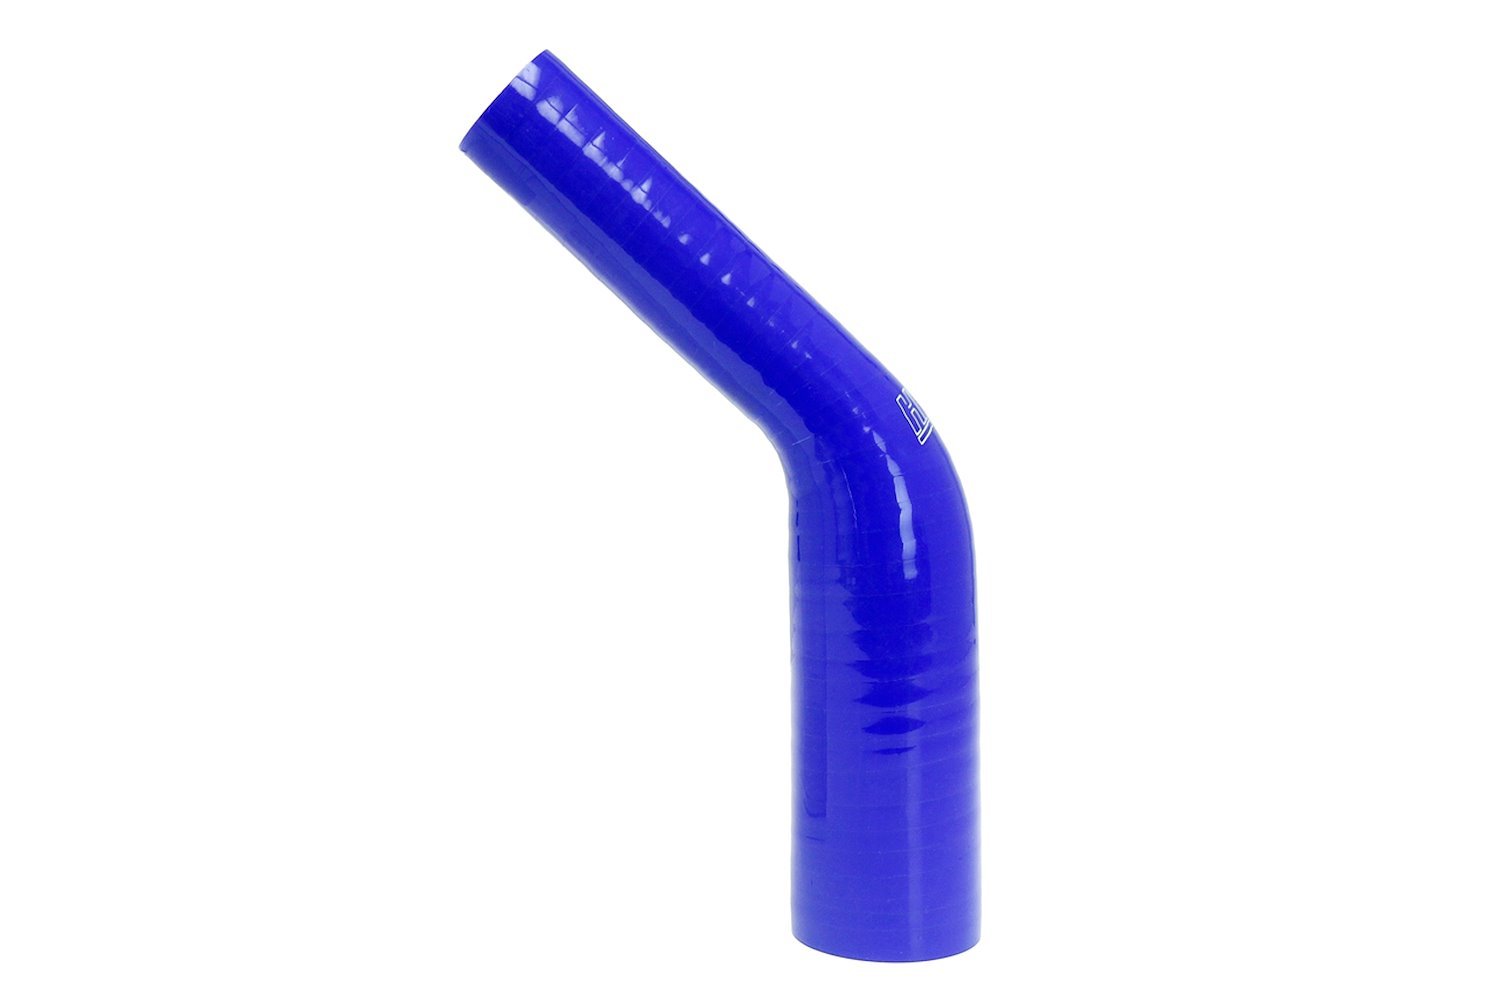 HTSER45-125-175-BLUE Silicone 45-Degree Elbow Hose, High-Temp 4-Ply Reinforced, 1-1/4 in. - 1-3/4 in. ID, Blue